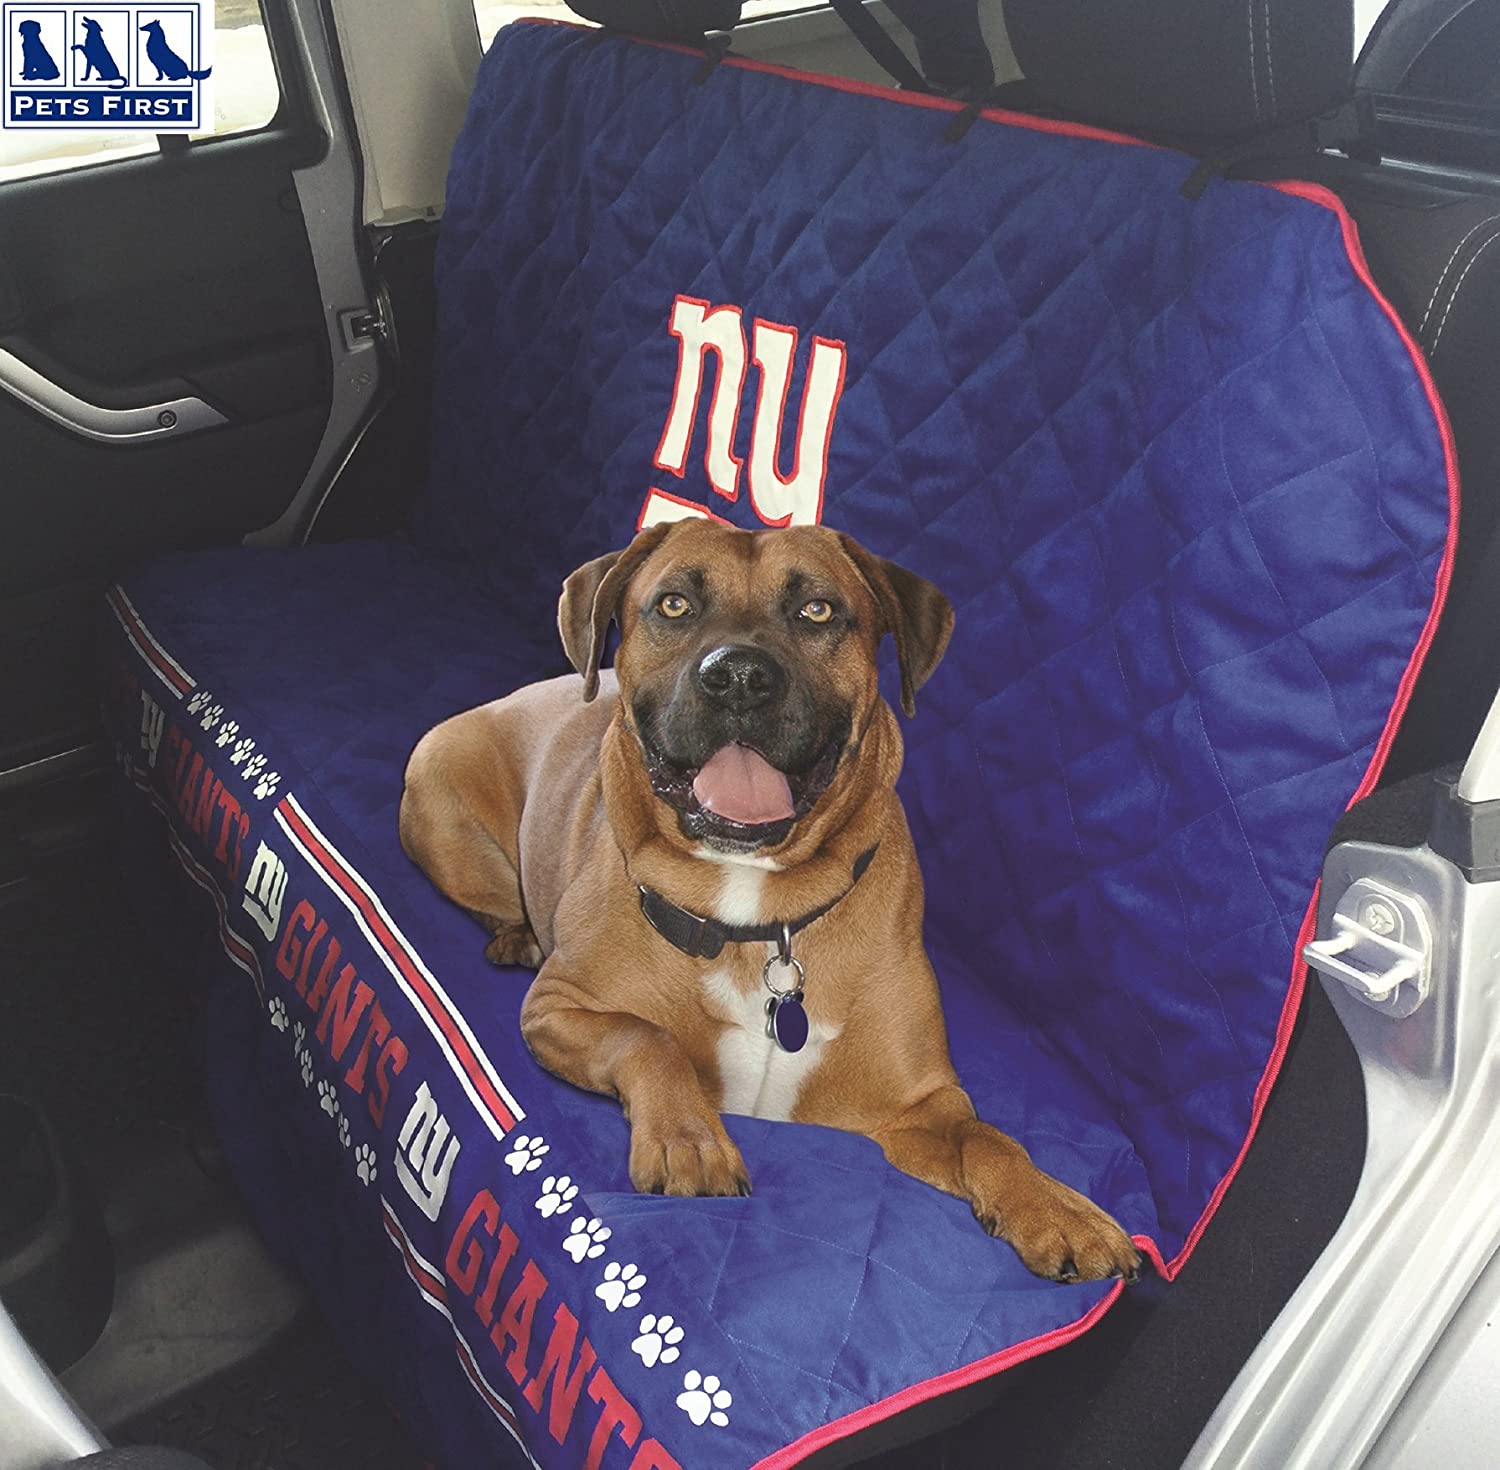 50"x50" Pets First NFL New York Giant Pet Car Seat Cover $30 + Free Shipping w/ Amazon Prime or Orders $25+